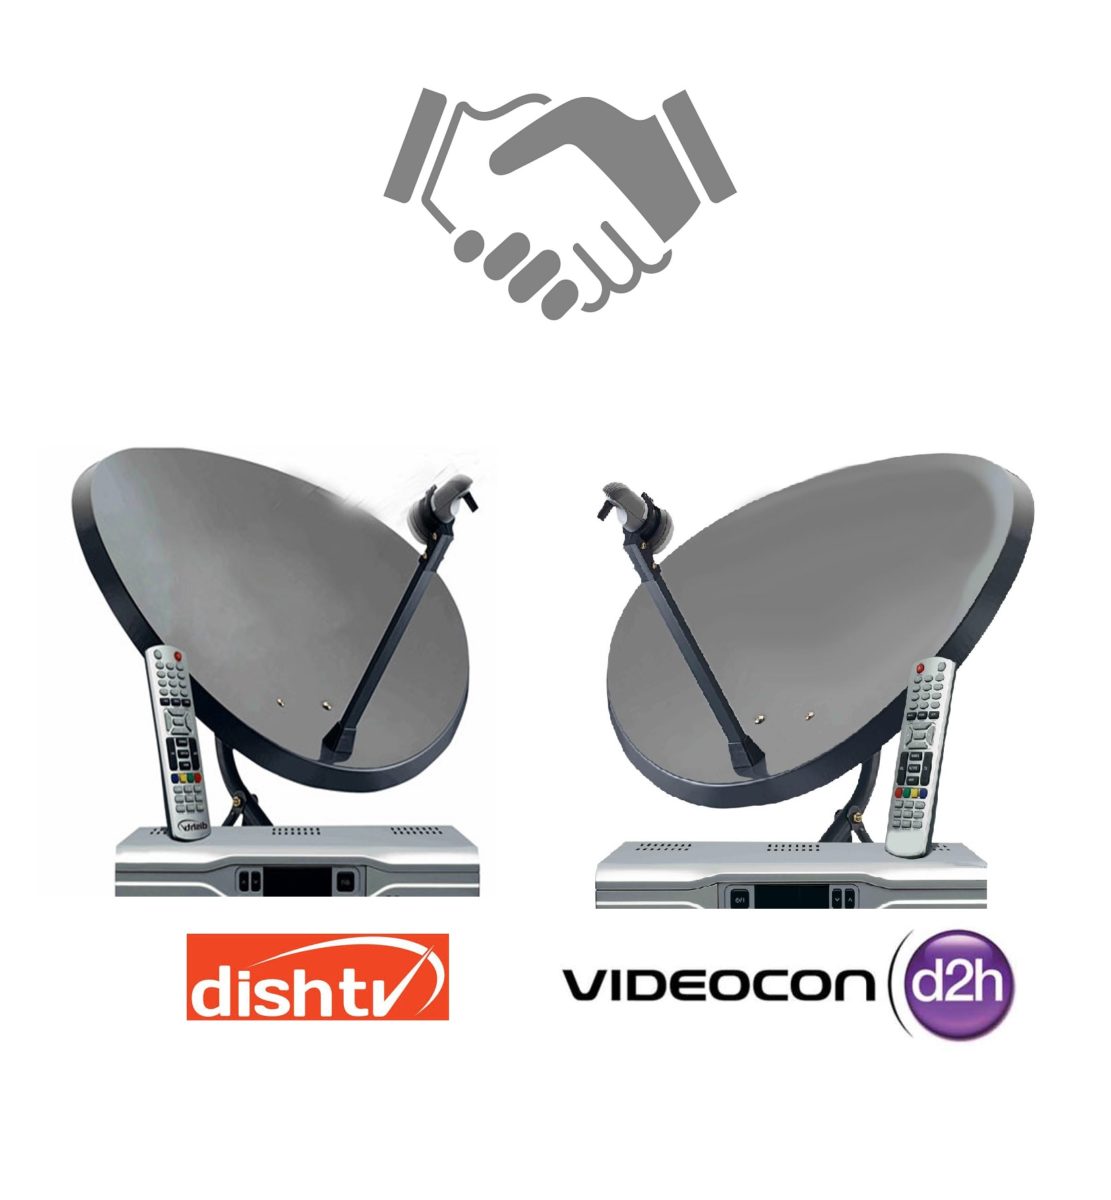 Making-India-largest-DTH-Broadcaster-Videocon-Dish-tv